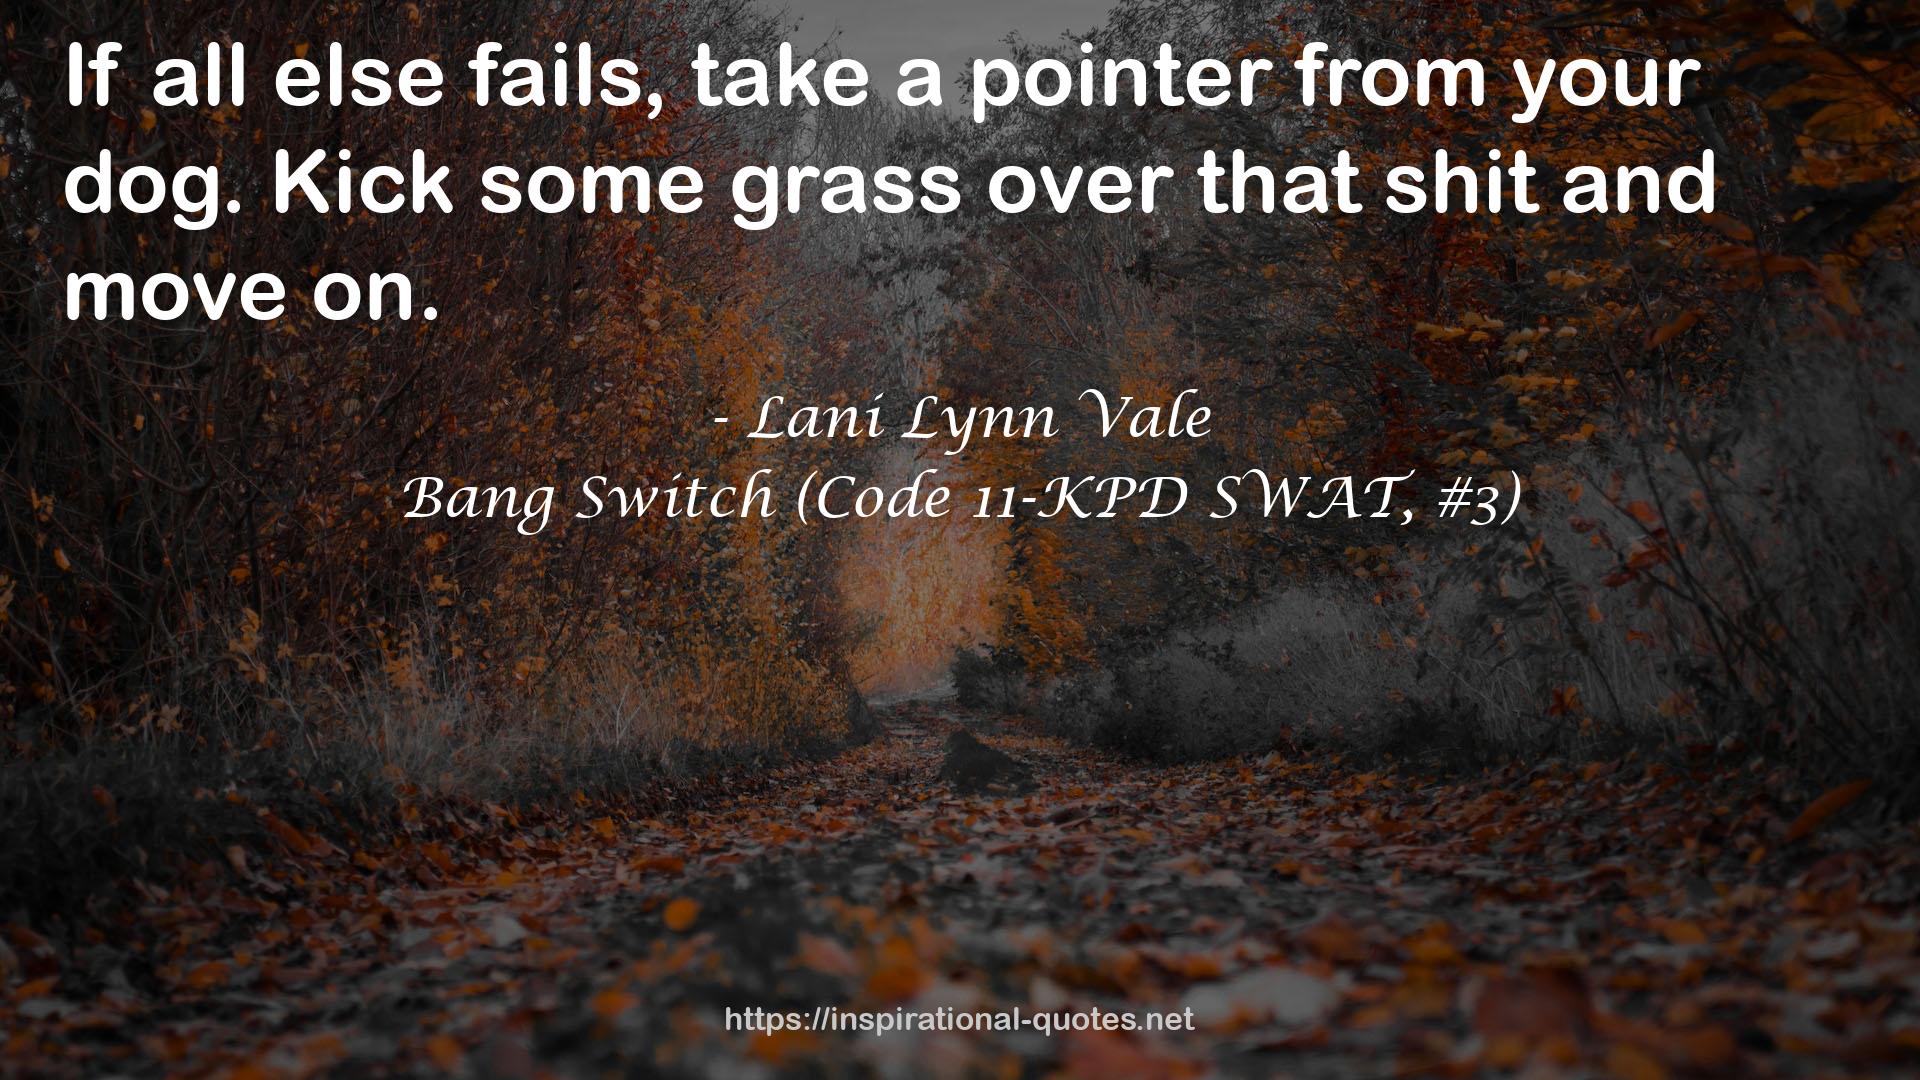 Bang Switch (Code 11-KPD SWAT, #3) QUOTES